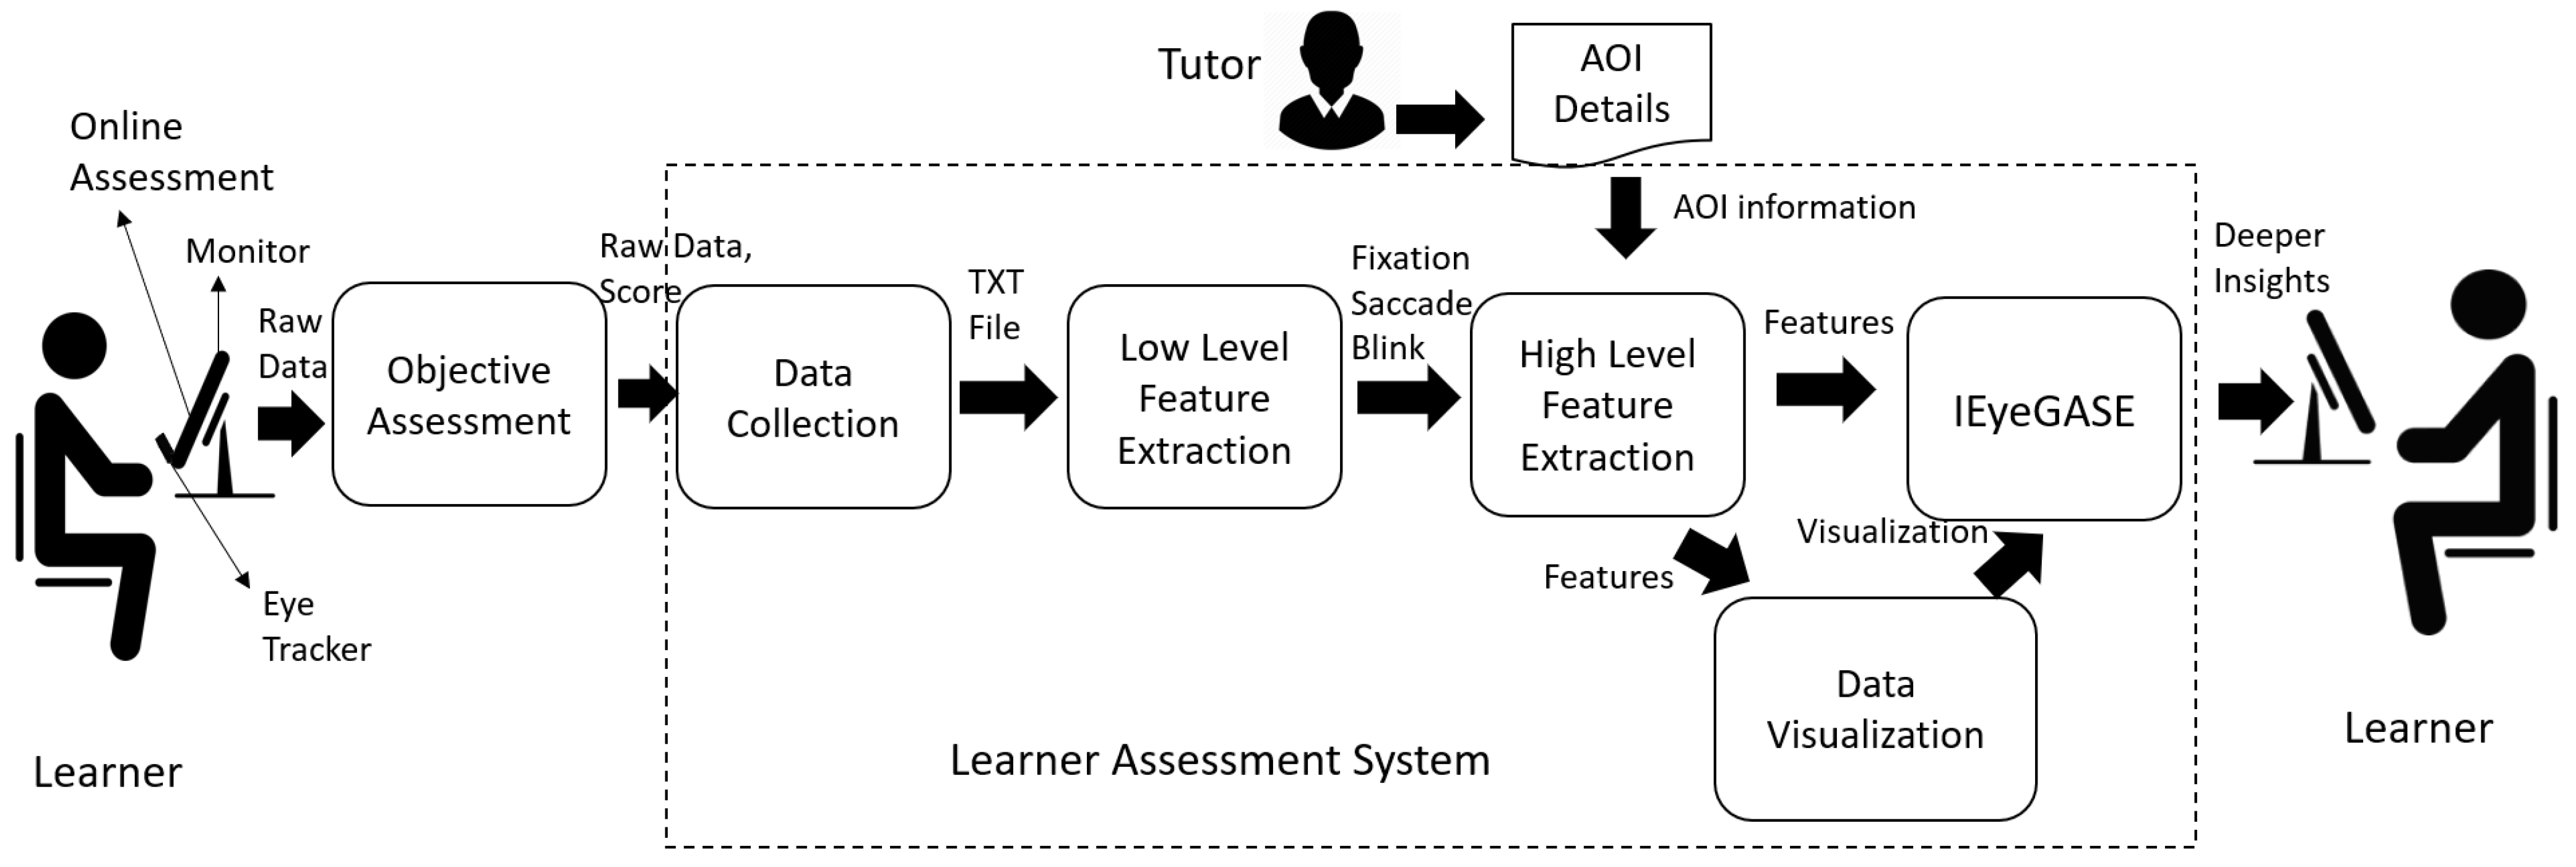 Sensors | Free Full-Text | IEyeGASE: An Intelligent Eye Gaze-Based  Assessment System for Deeper Insights into Learner Performance